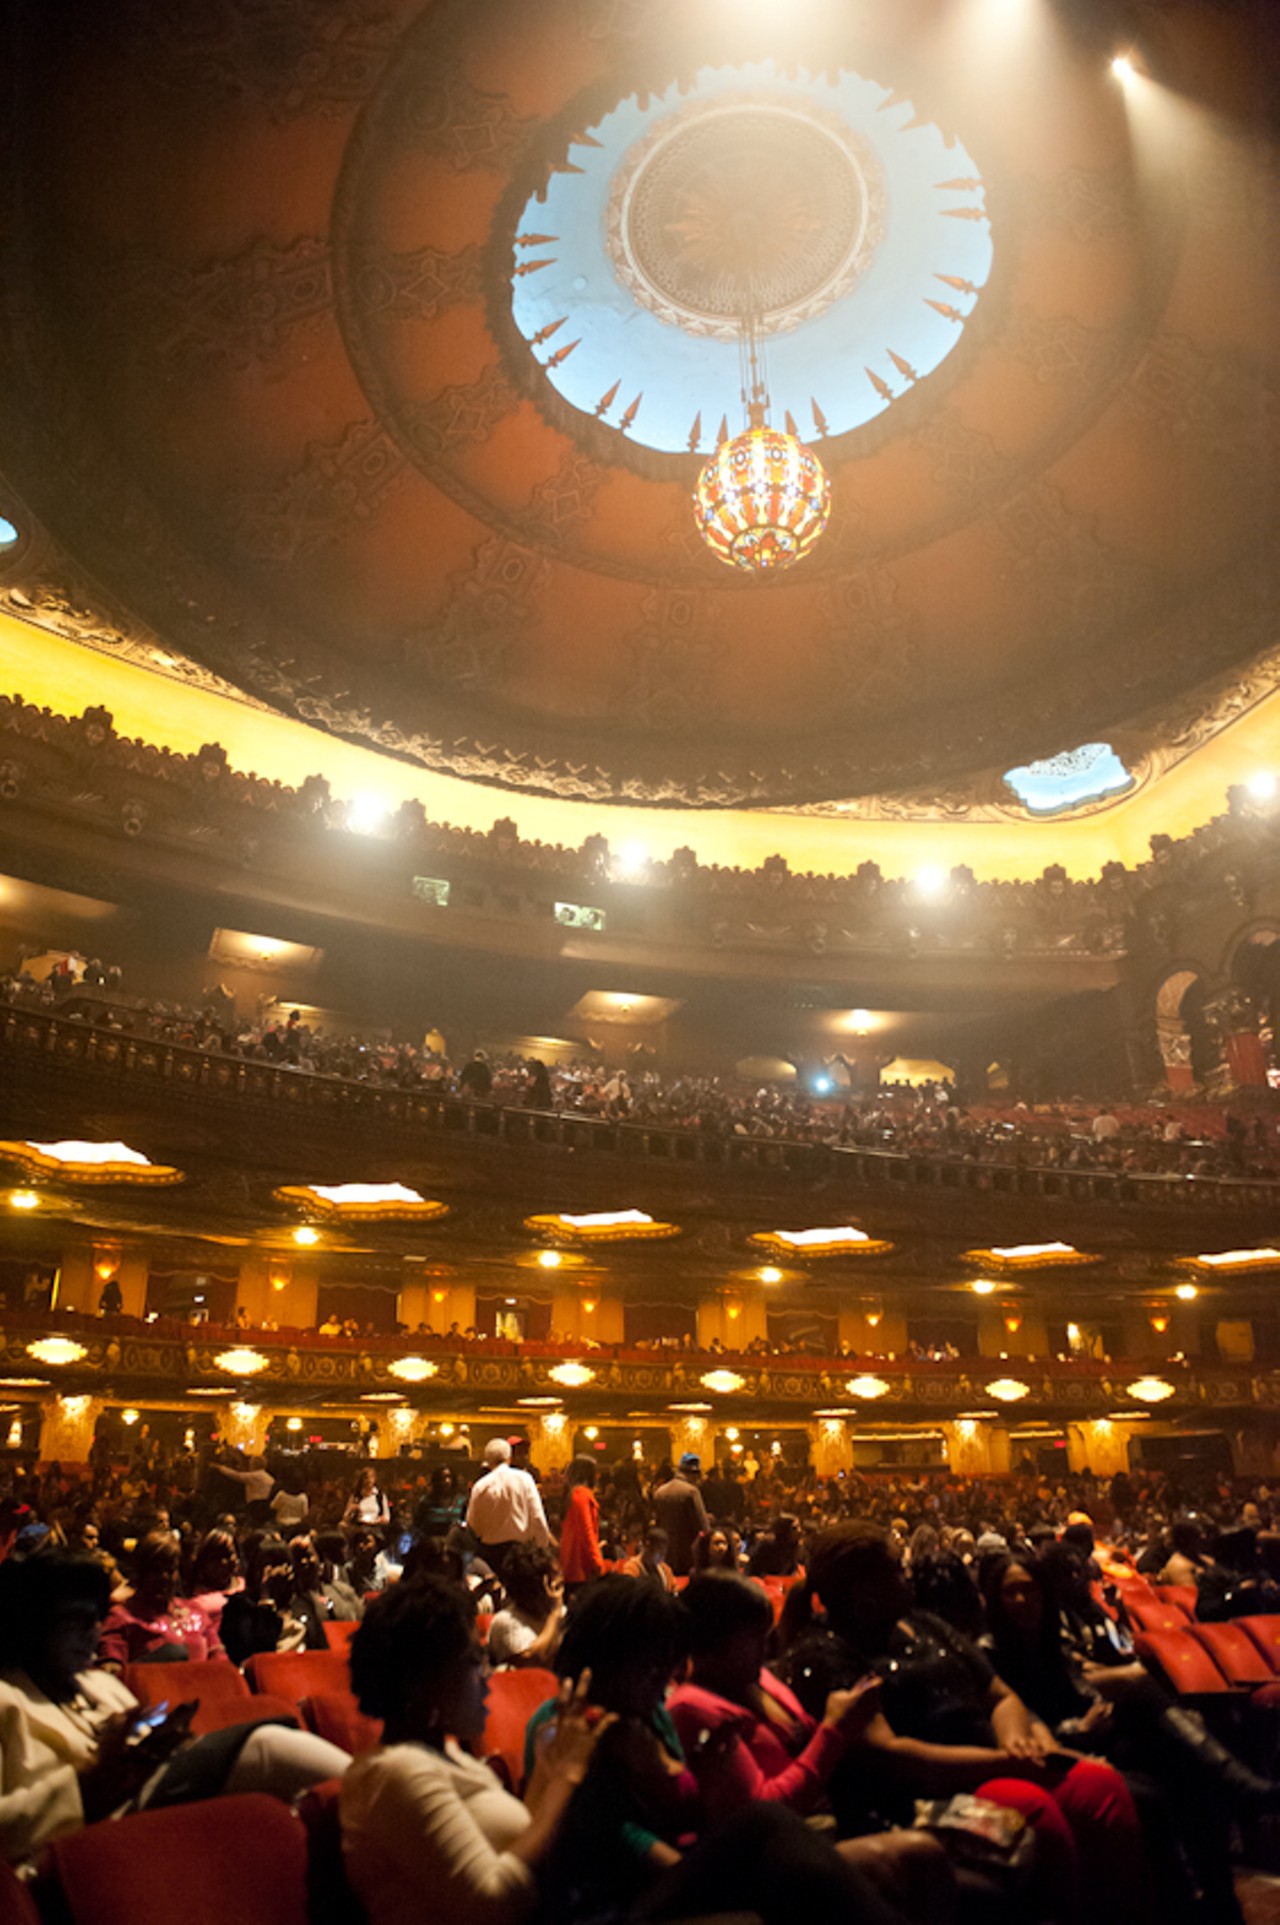 The Fox Theatre begins to fill up as the show is about to get under way.